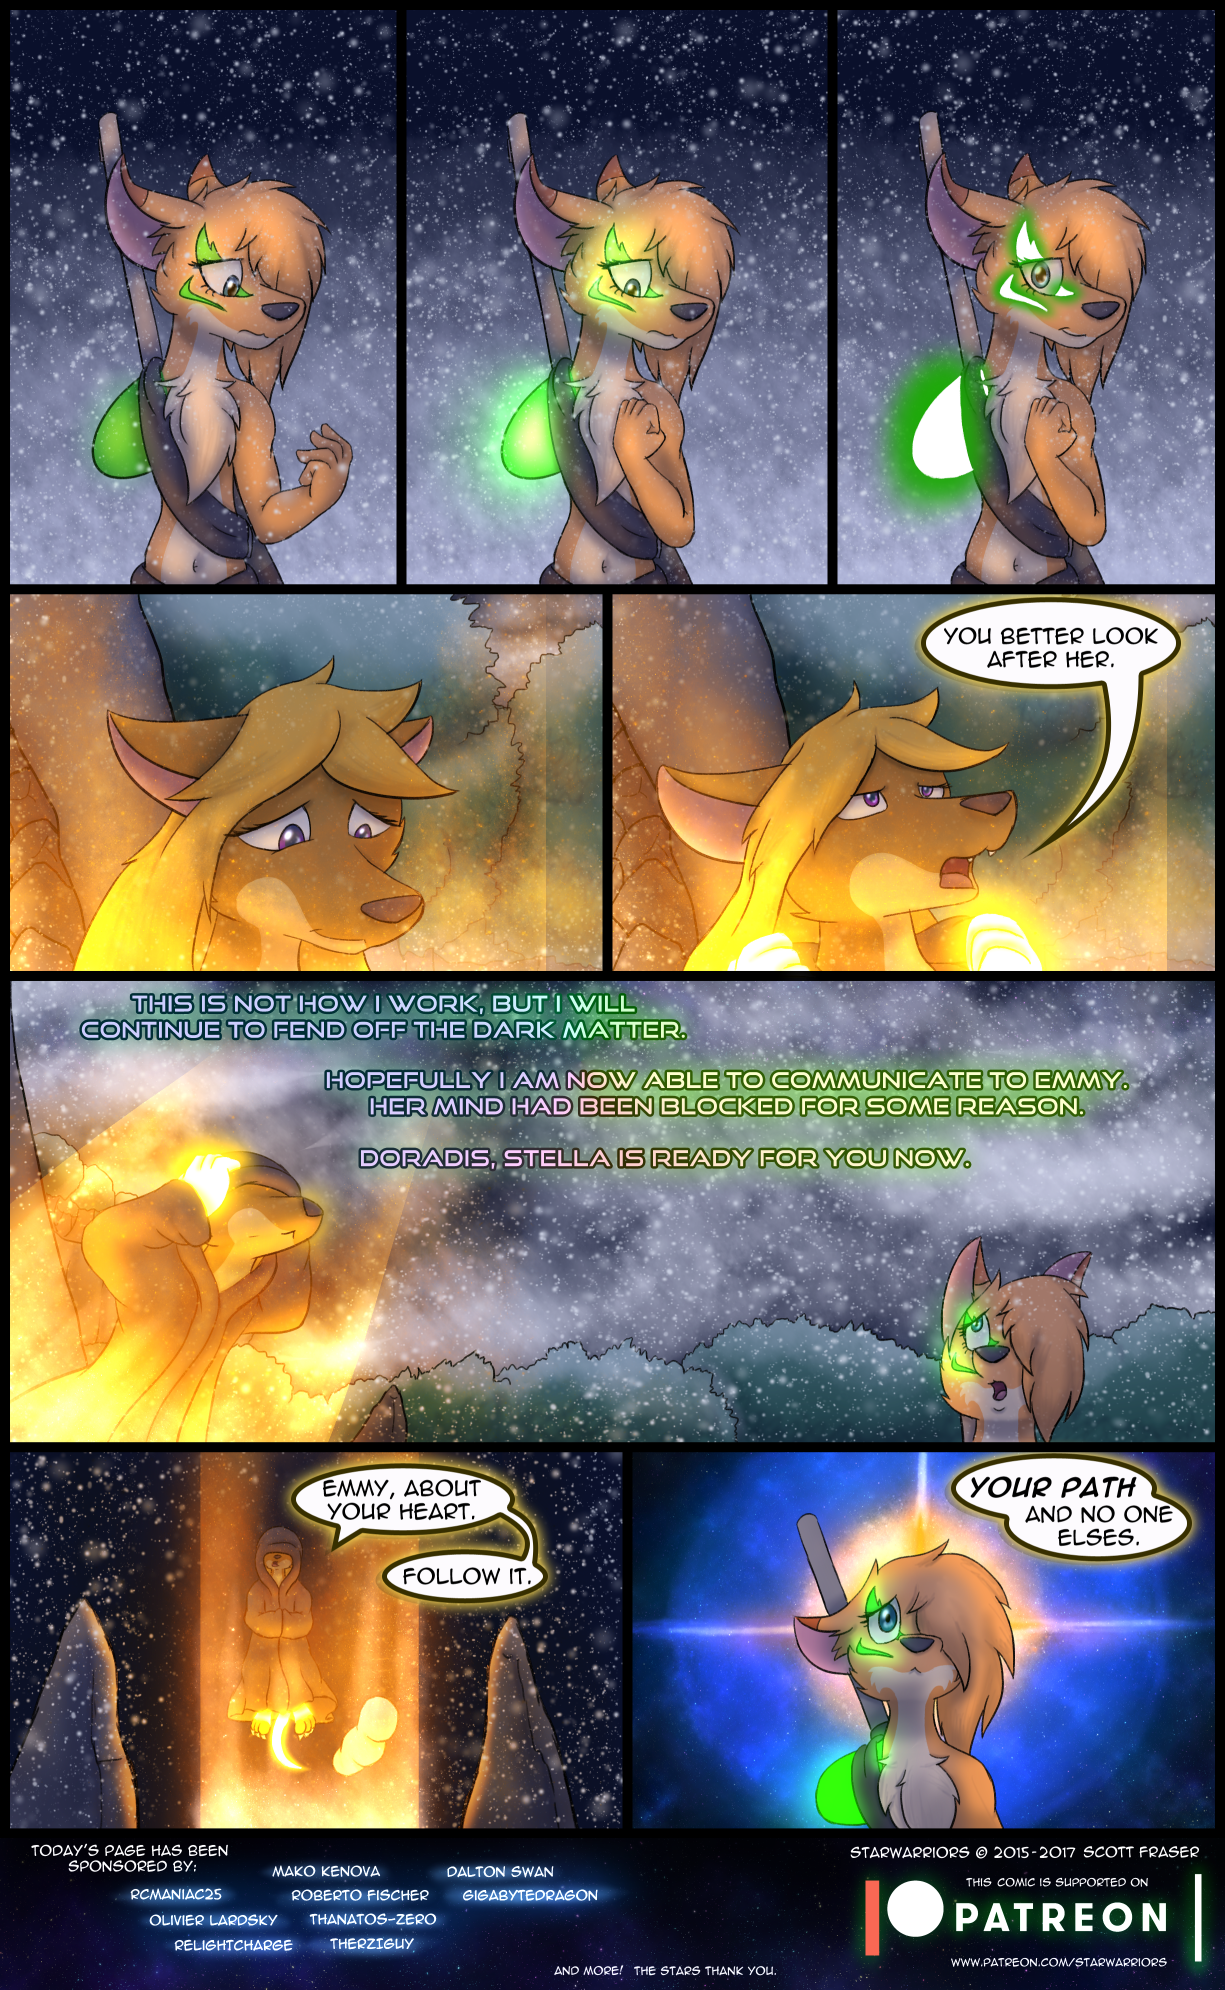 Ch3 Page 14 – Follow Your Path